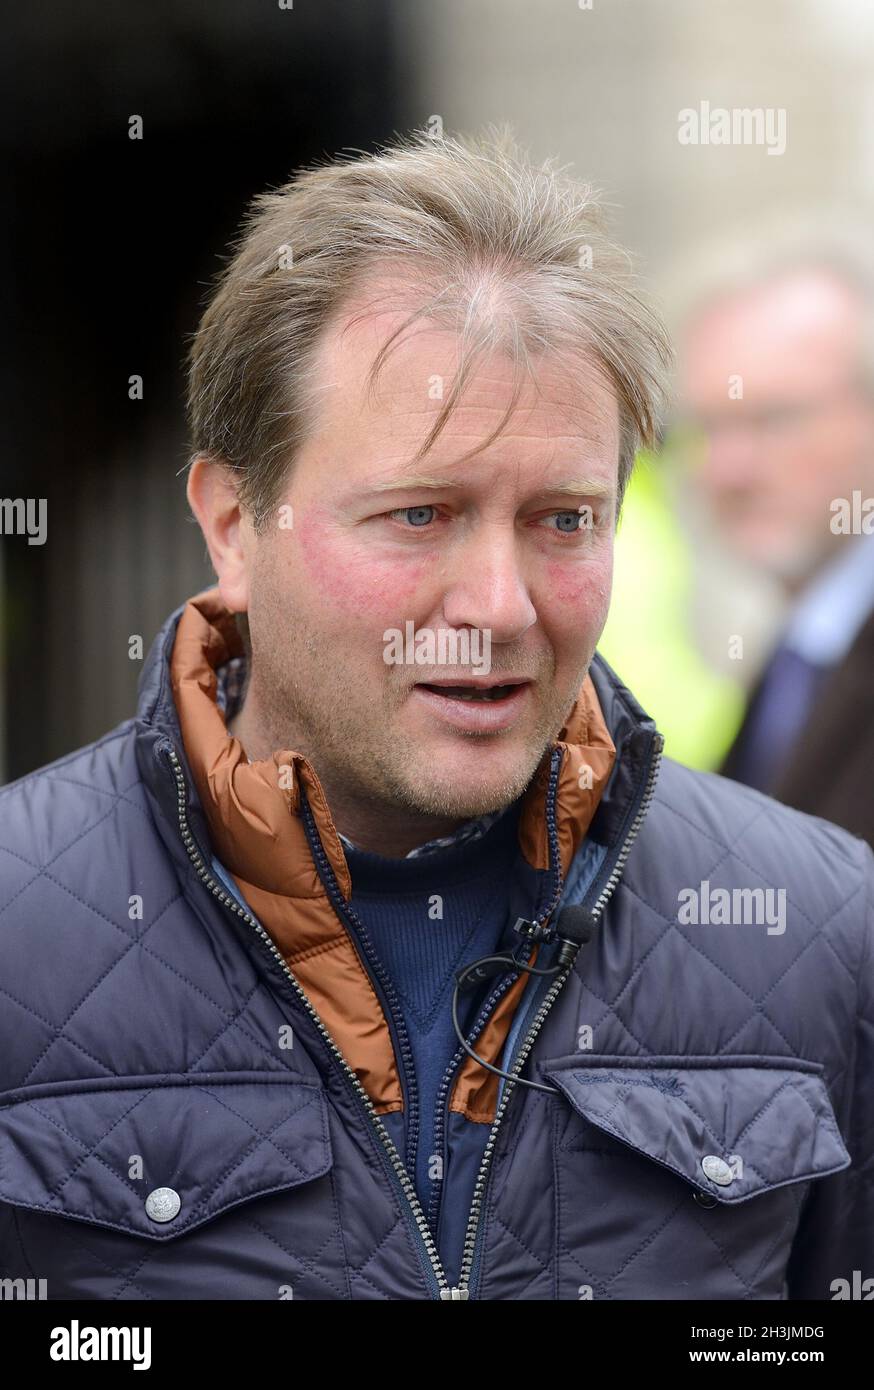 Richard Ratcliffe - husband of Nazanin Zaghari-Ratcliffe, detained in Iran - just before a meeting with Foreign Secretary Liz Truss on the fifth day o Stock Photo